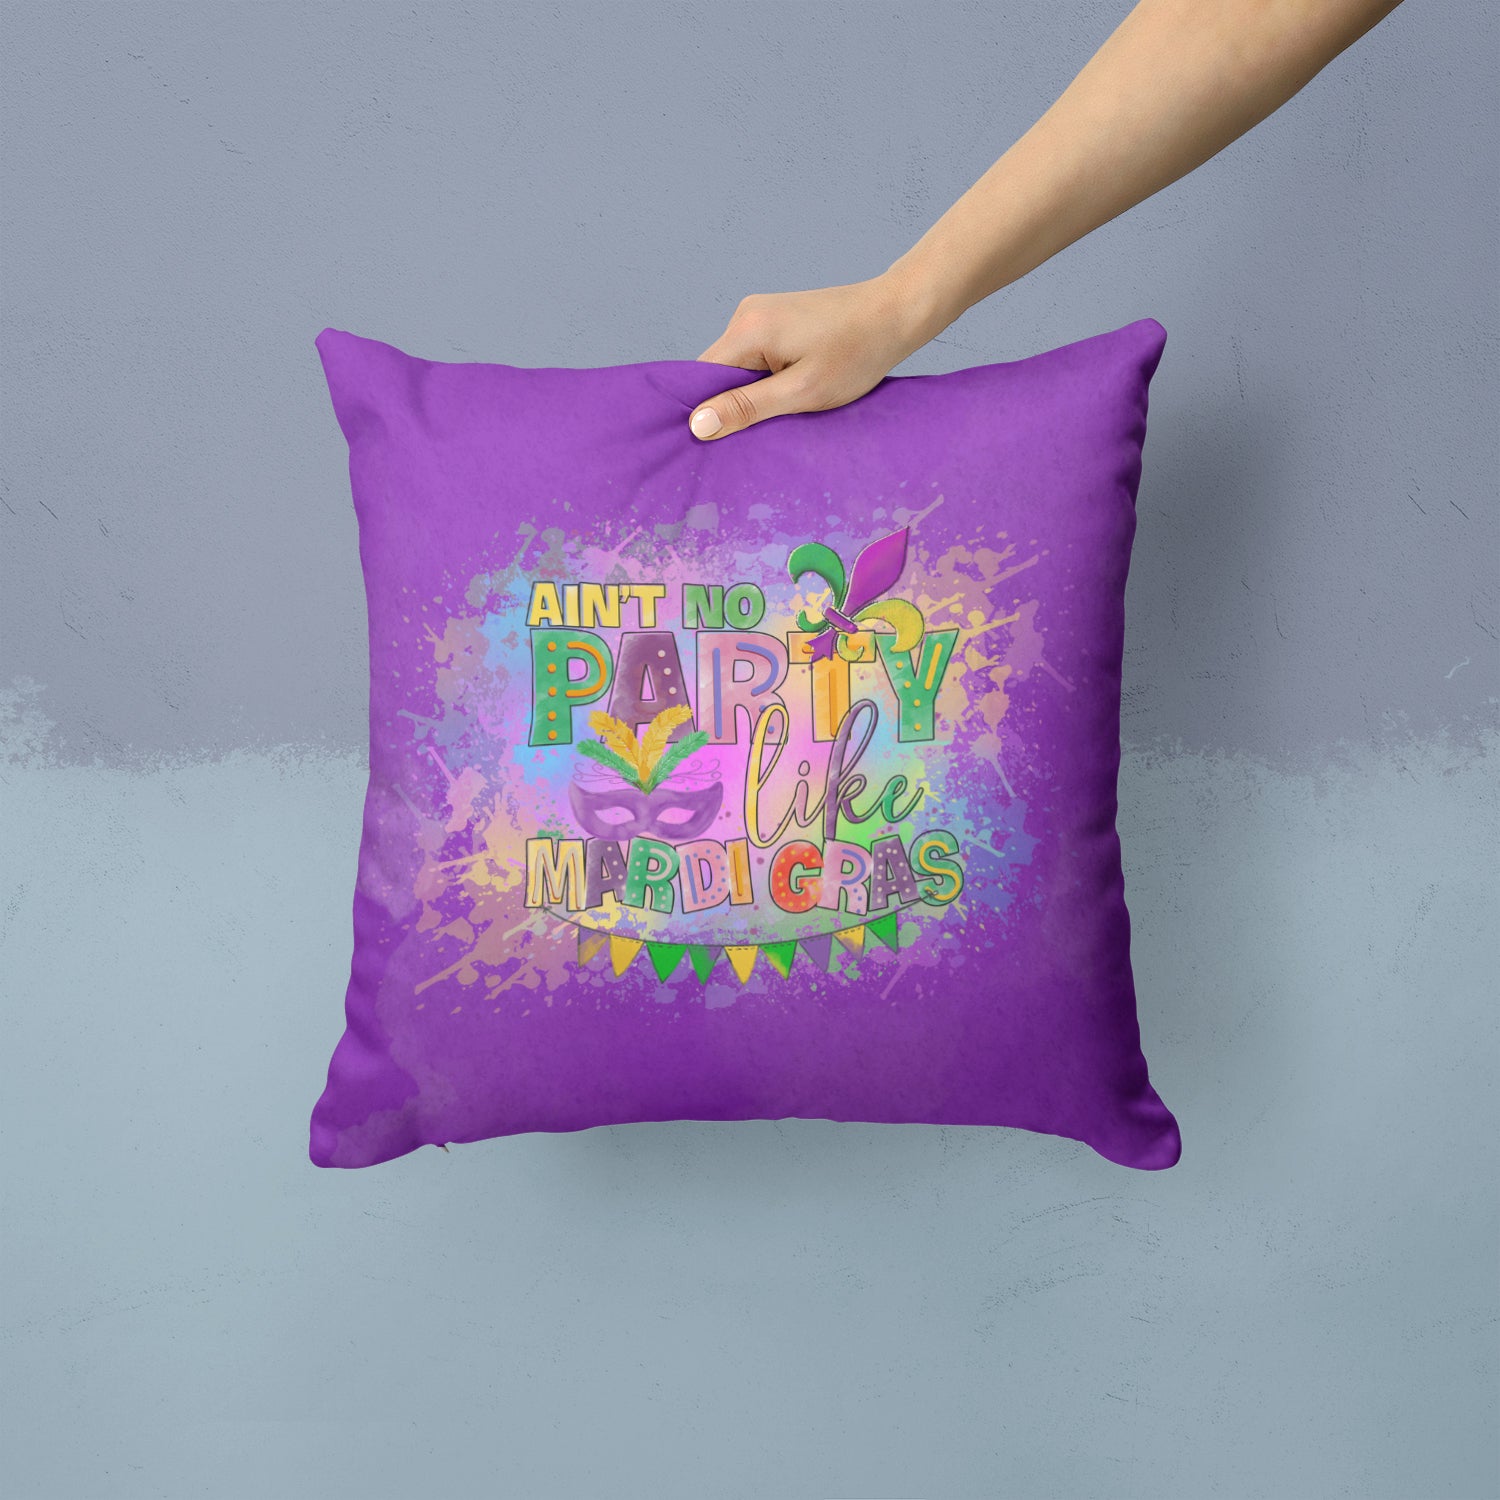 Buy this Ain't No Party Like Mardi Gras Fabric Decorative Pillow